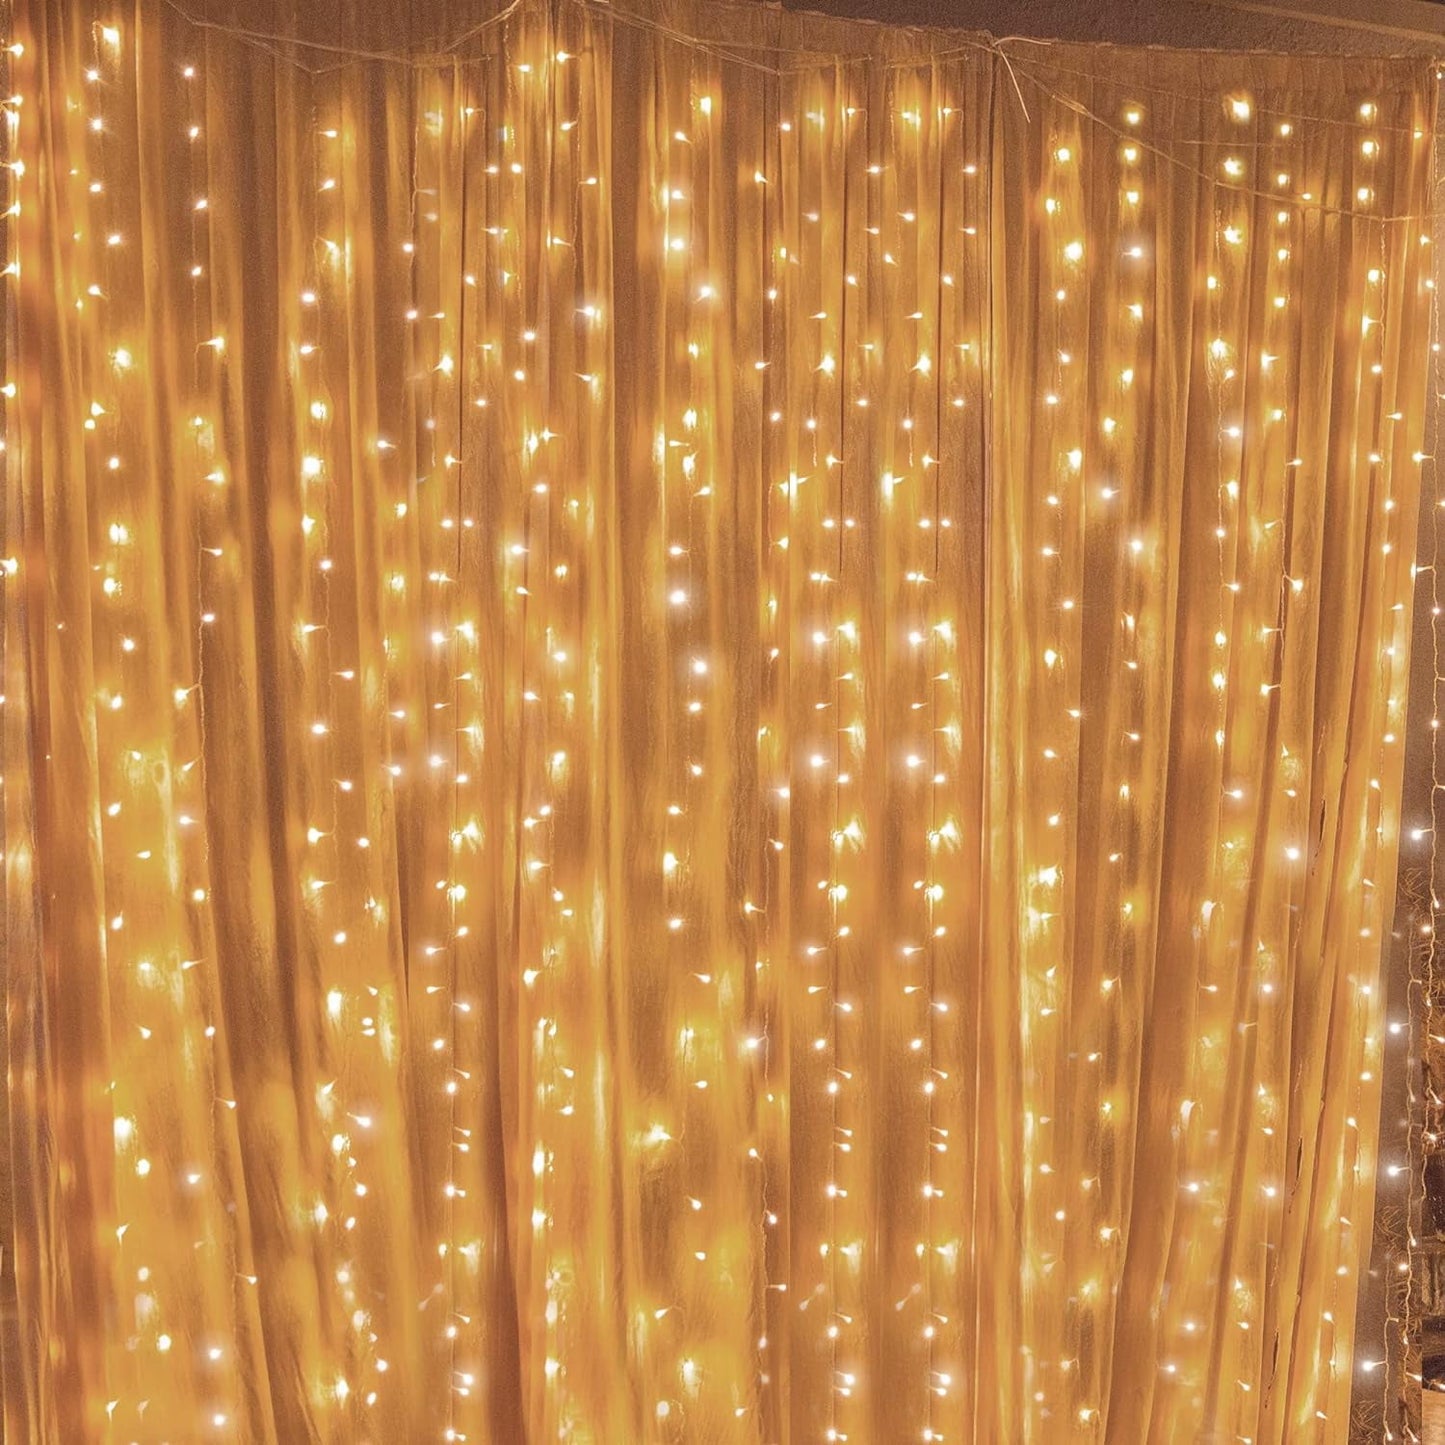 Metronic Fairy Lights 300LED Fairy Lights for Bedroom, 9.8 X 9.8ft Christmas Light Indoor Warm Curtain Lights Indoor, 8 Modes String Lights with Remote Led Lights for Bedroom